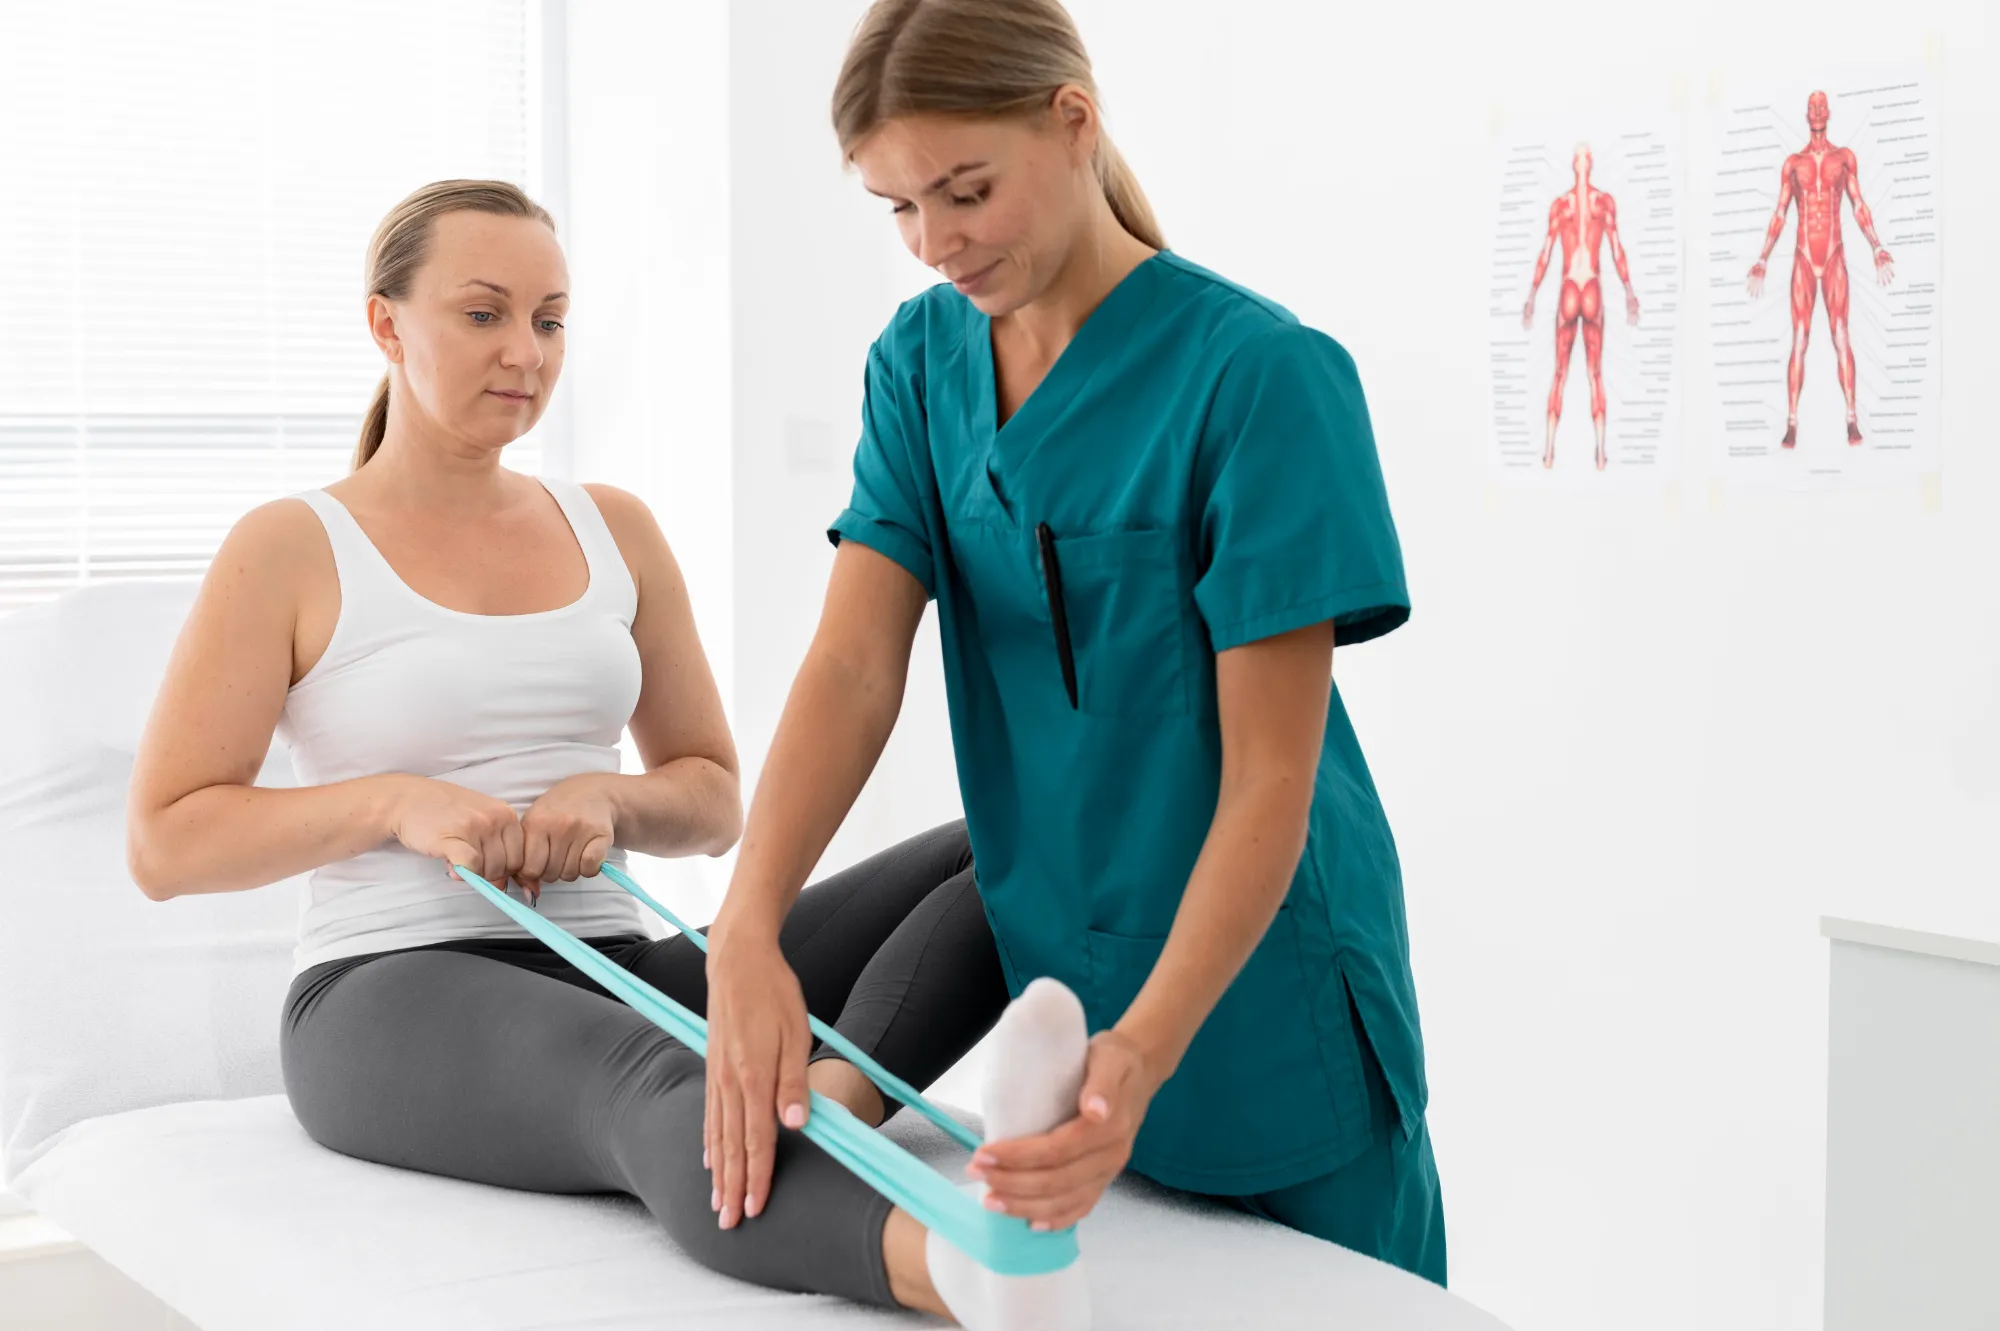 A nurse and woman engaged in physical therapy on an examination table